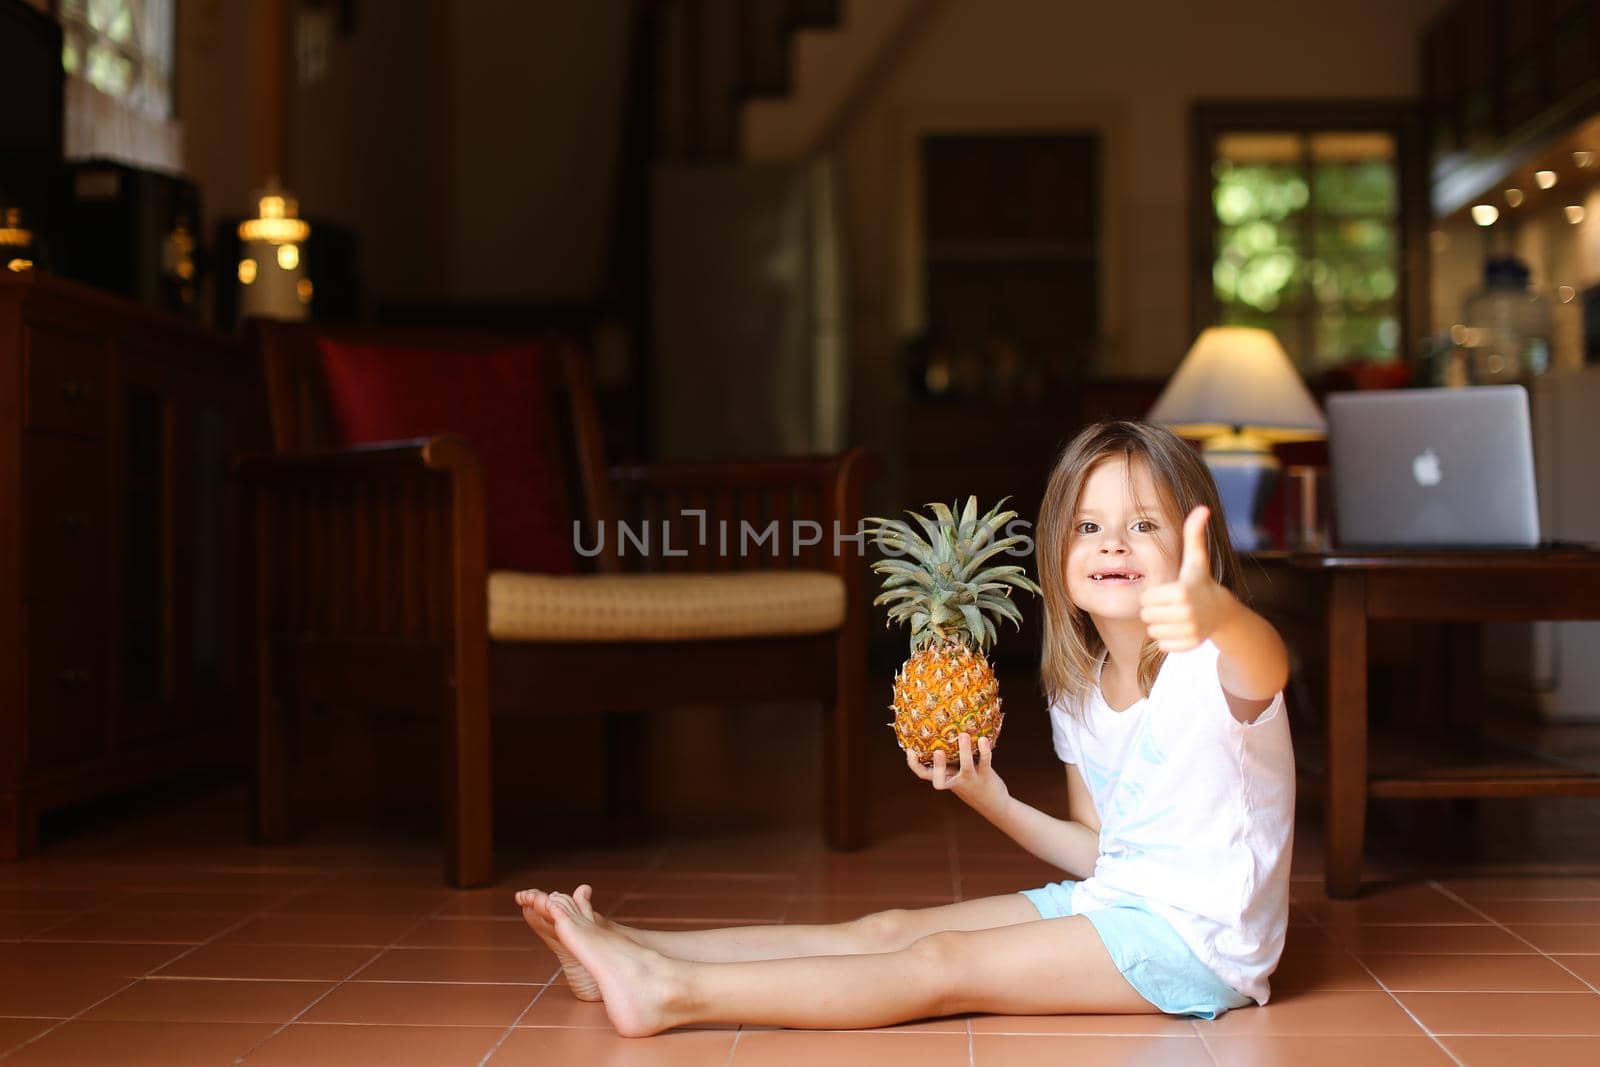 Little smiling female kid sitting on floor in living room with pineapple and showing thumbs up, laptop in background. Concept of health life, fruit and childhood.